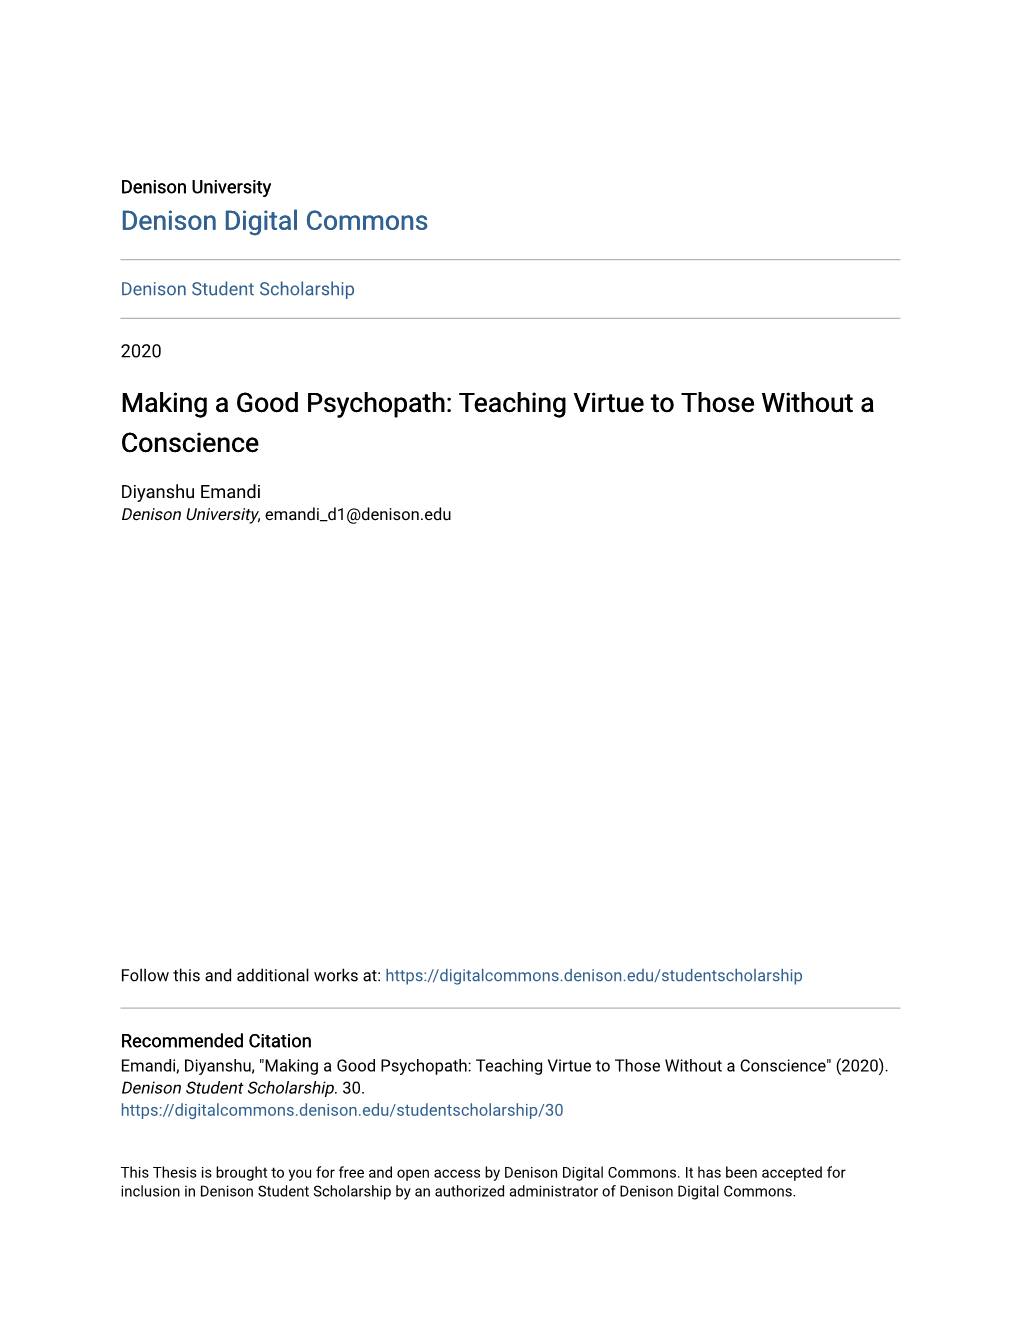 Making a Good Psychopath: Teaching Virtue to Those Without a Conscience